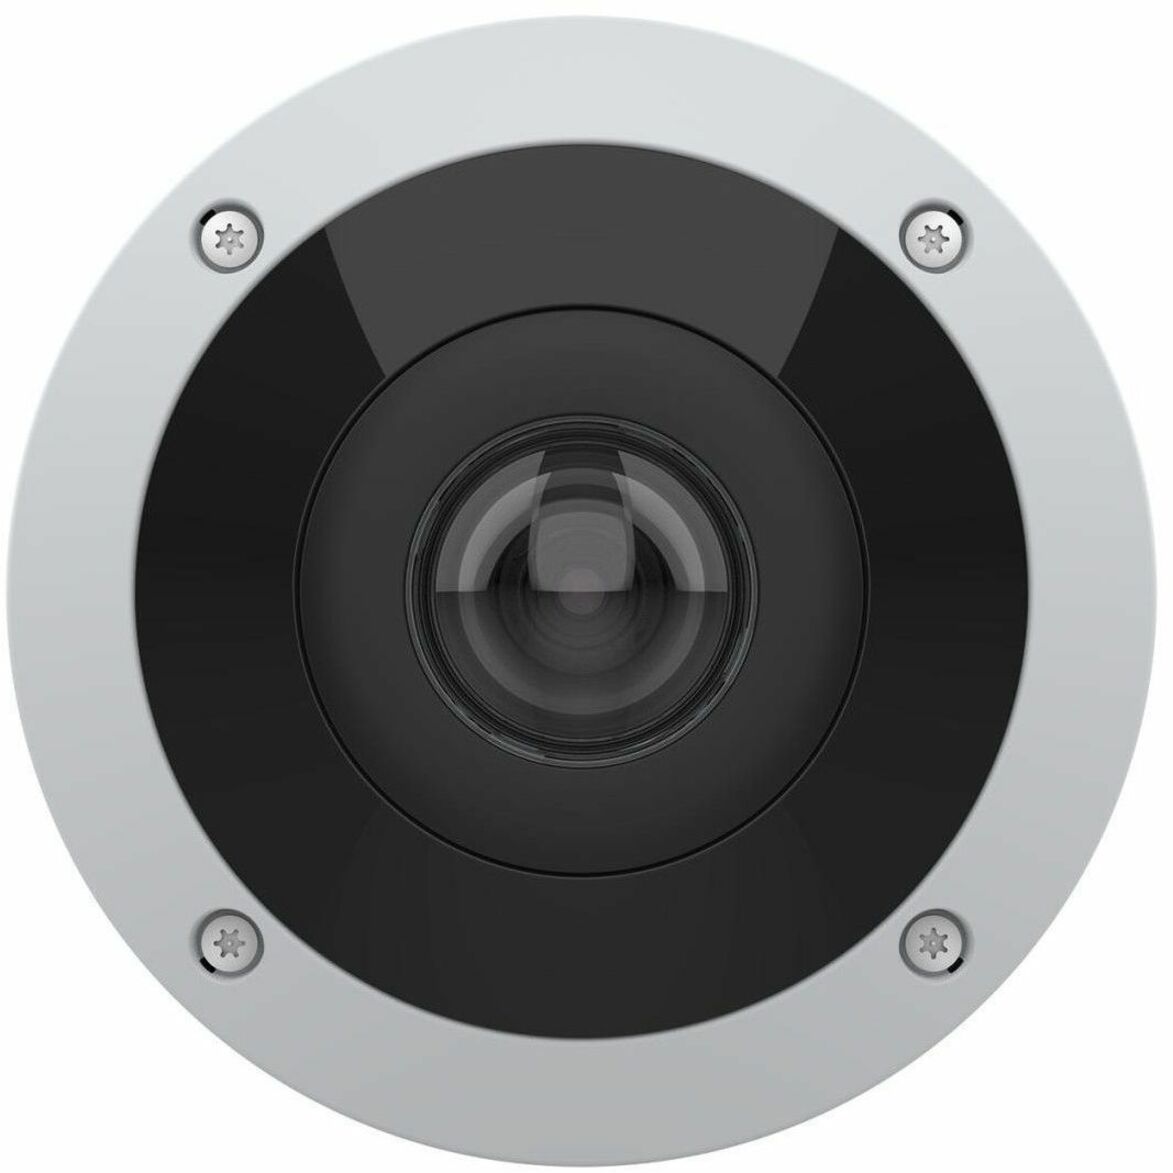 AXIS 02510-001 AXIS M4317-PLVE Panoramic Camera, 6 Megapixel, Outdoor, 182° Field of View, Night Vision, PoE